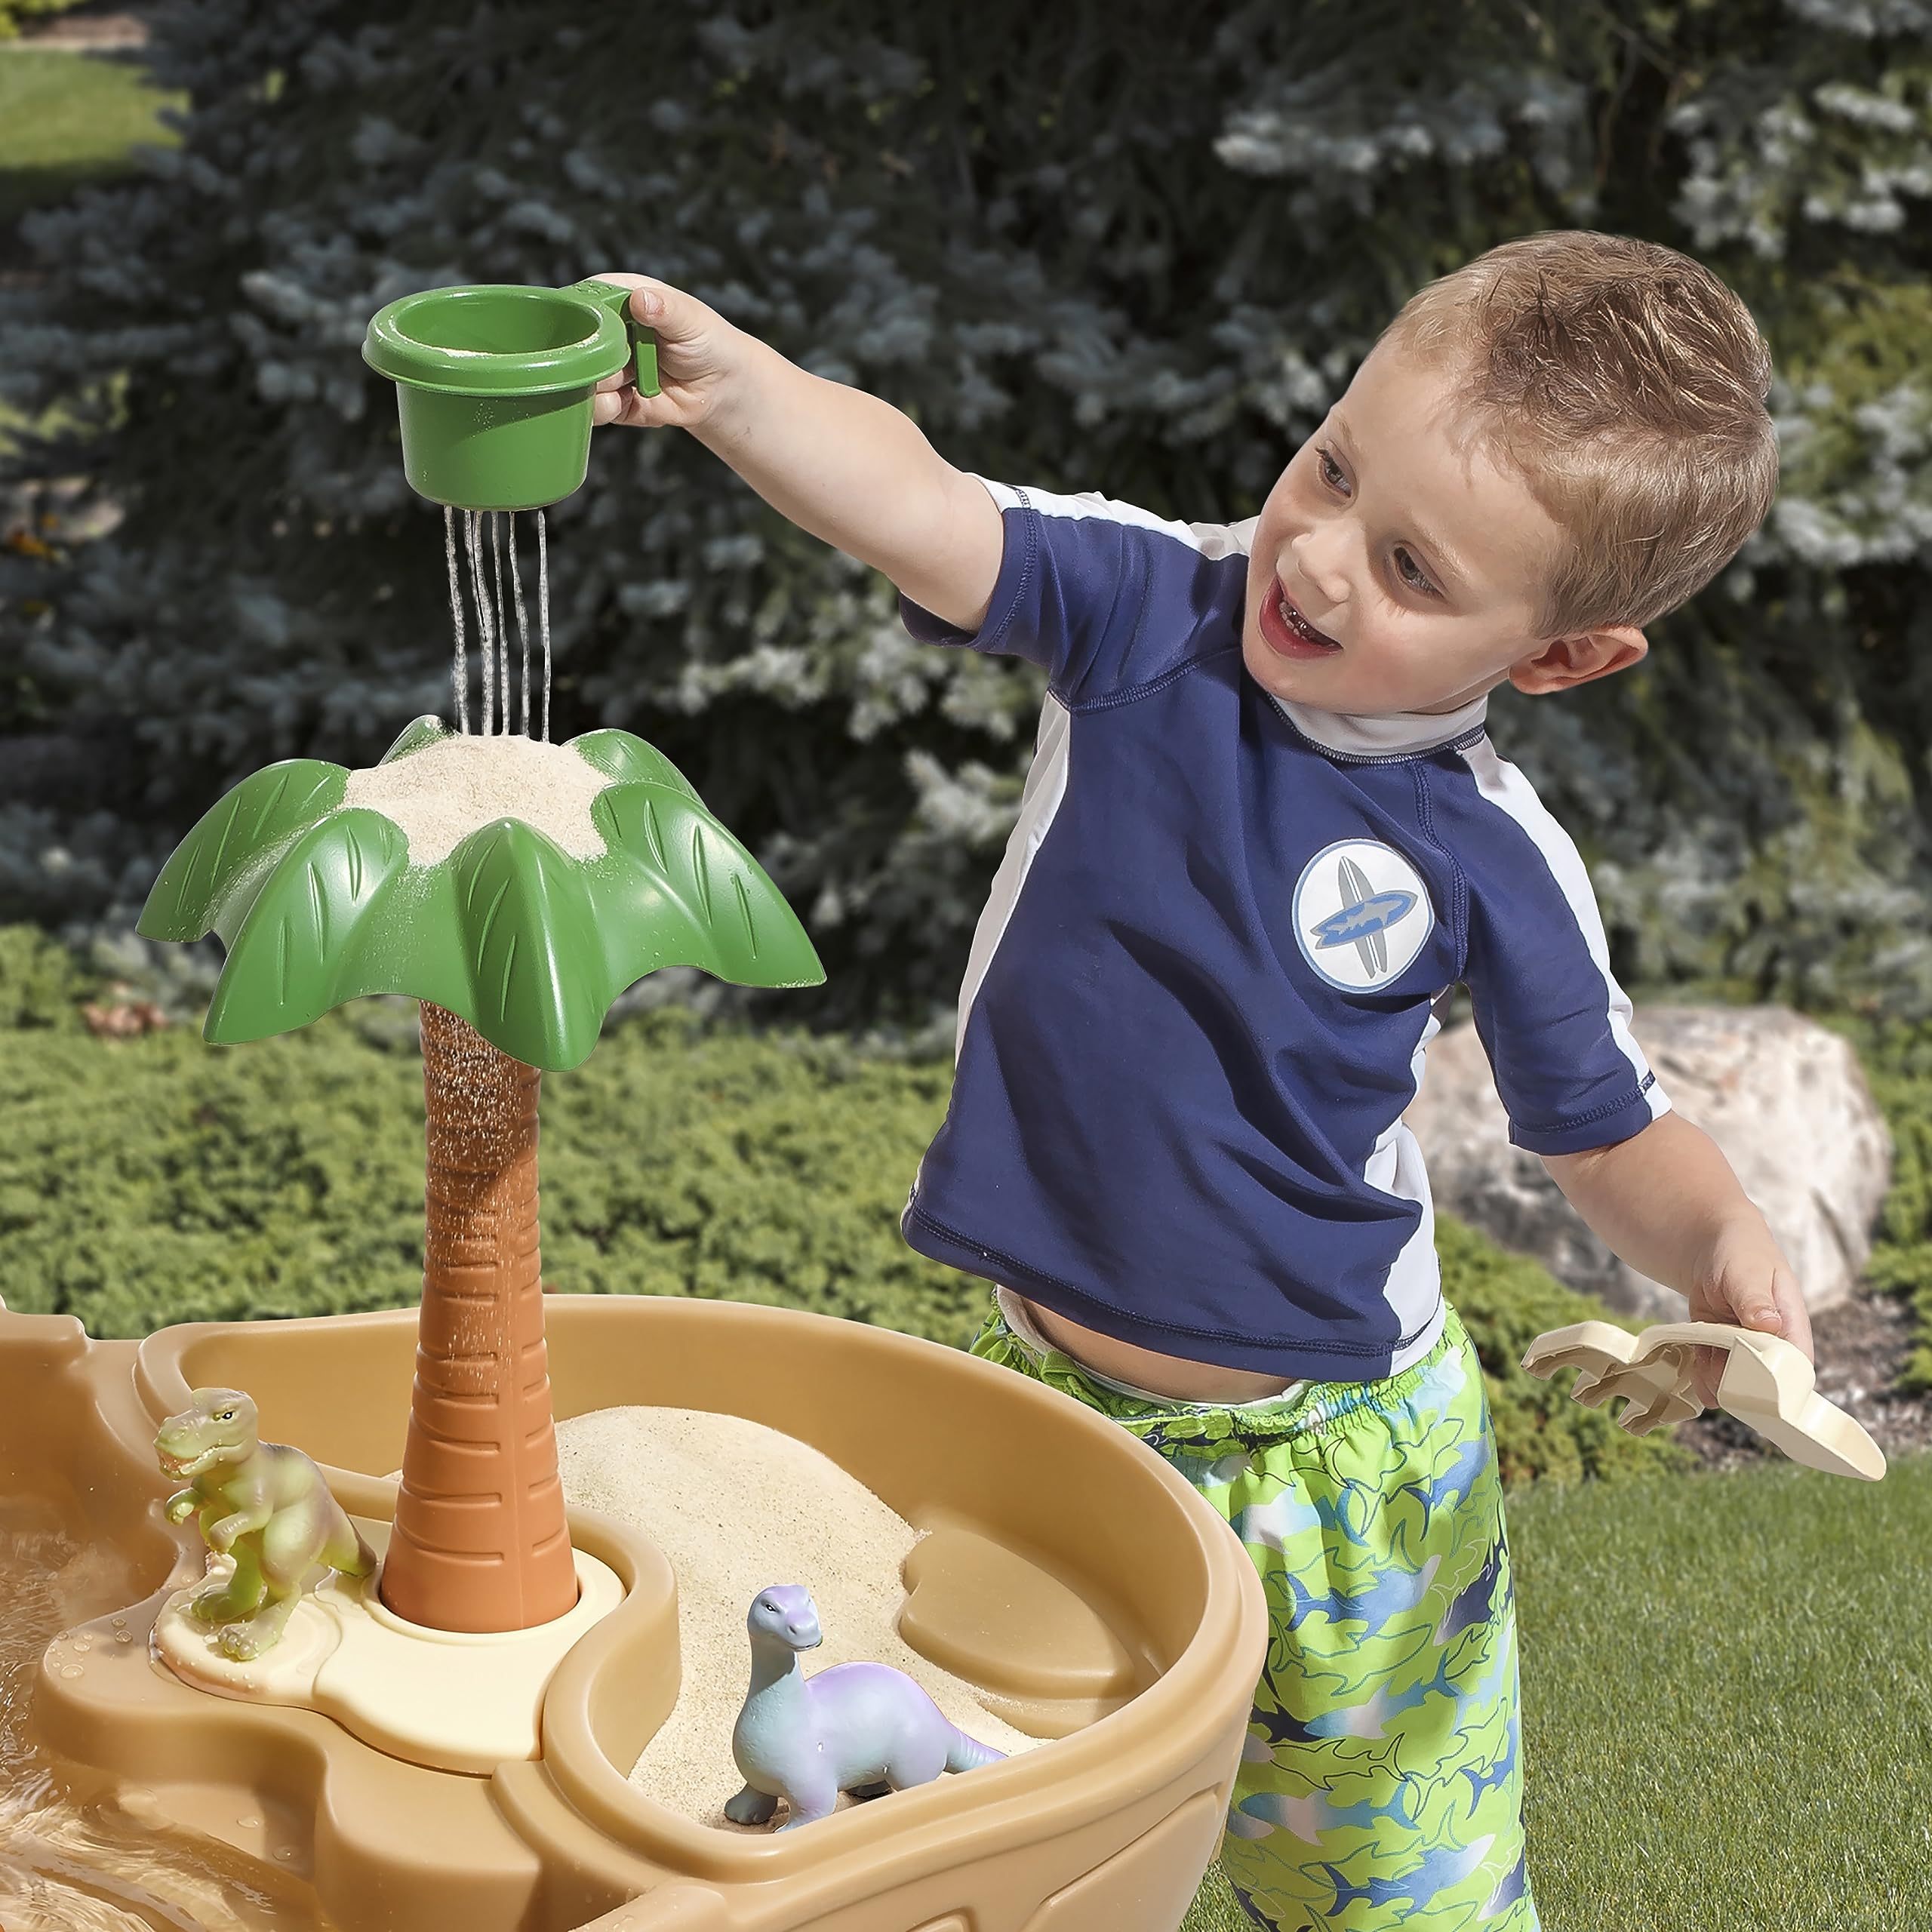 Step2 Dino Dig Sand & Water Table, 24 months to 60 months, Includes dino table, dino figures, accessories